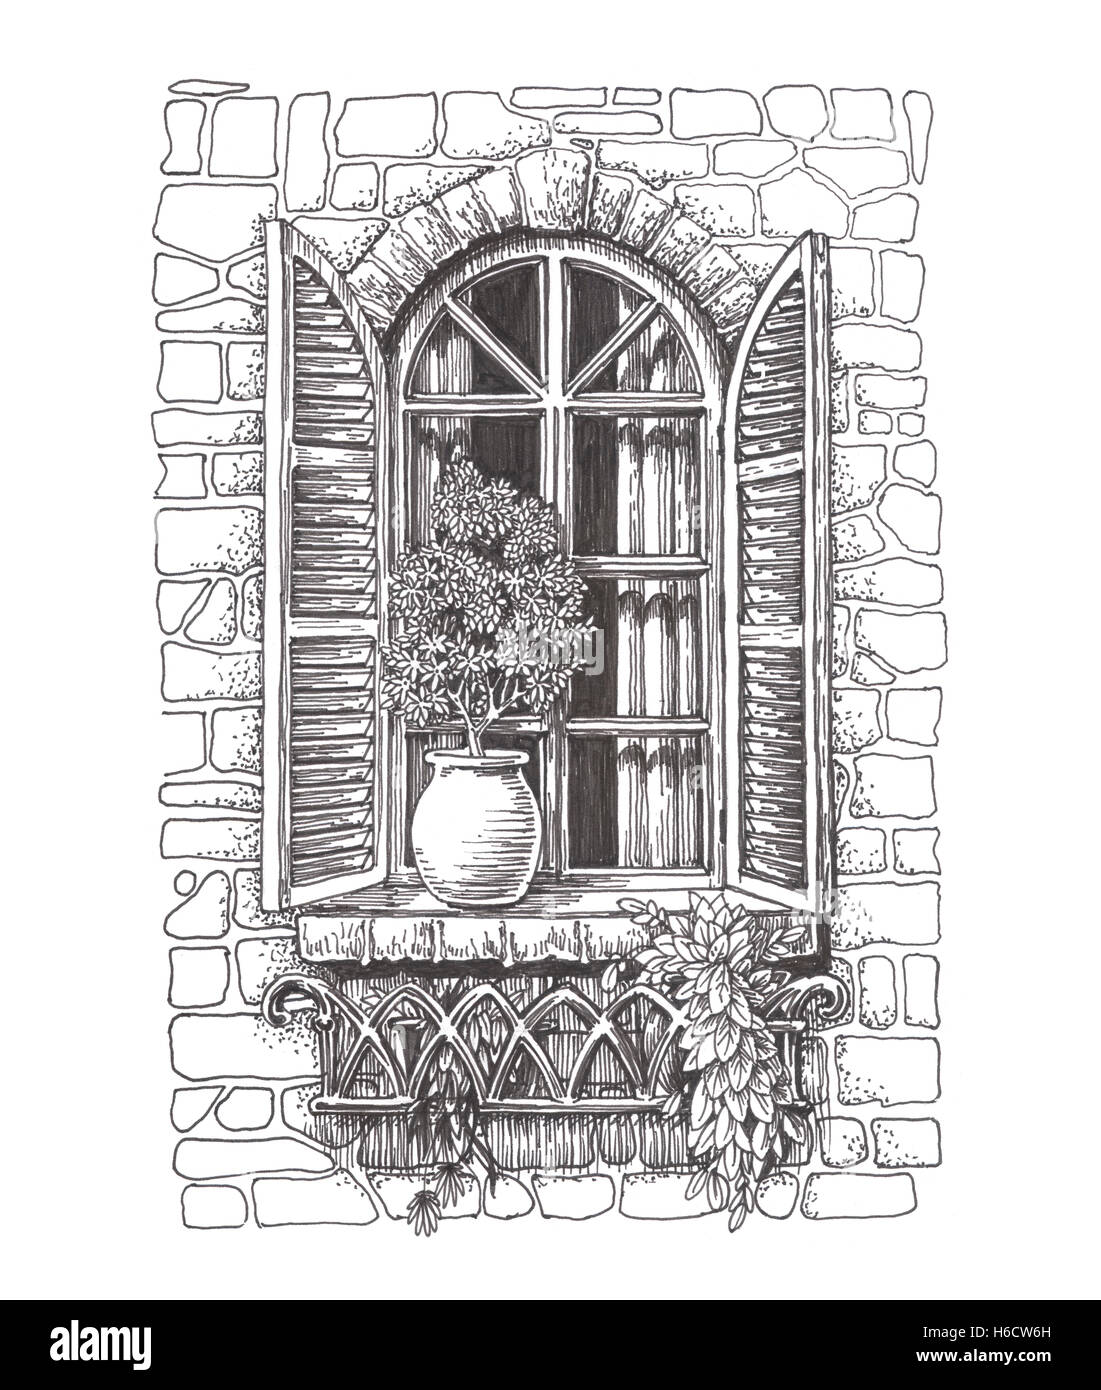 Drawn sketch vintage window with shutters Stock Photo